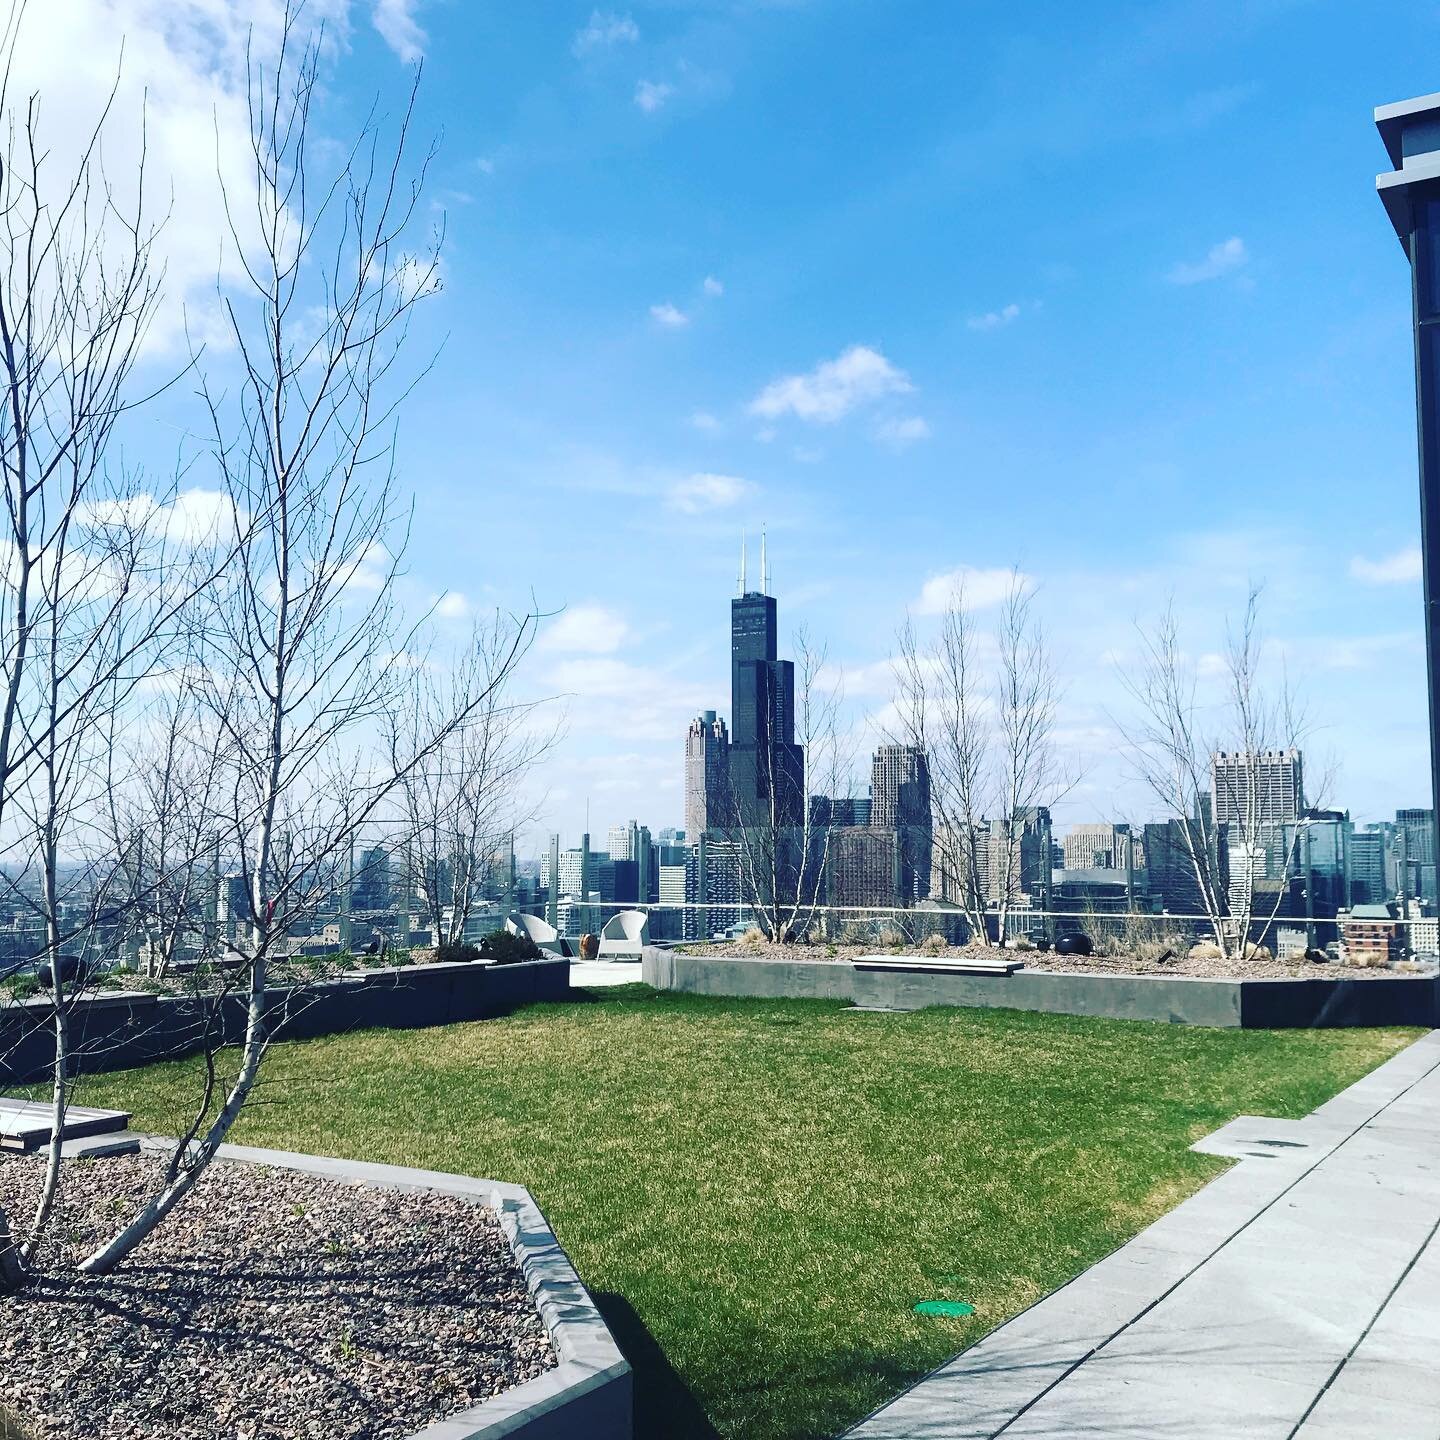 Some downtown Chicago service work 
#downtown #chicago #irrigation #lawnsprinklers #rooftop #greenroof #greenwall #skyscraper #service #plumbing